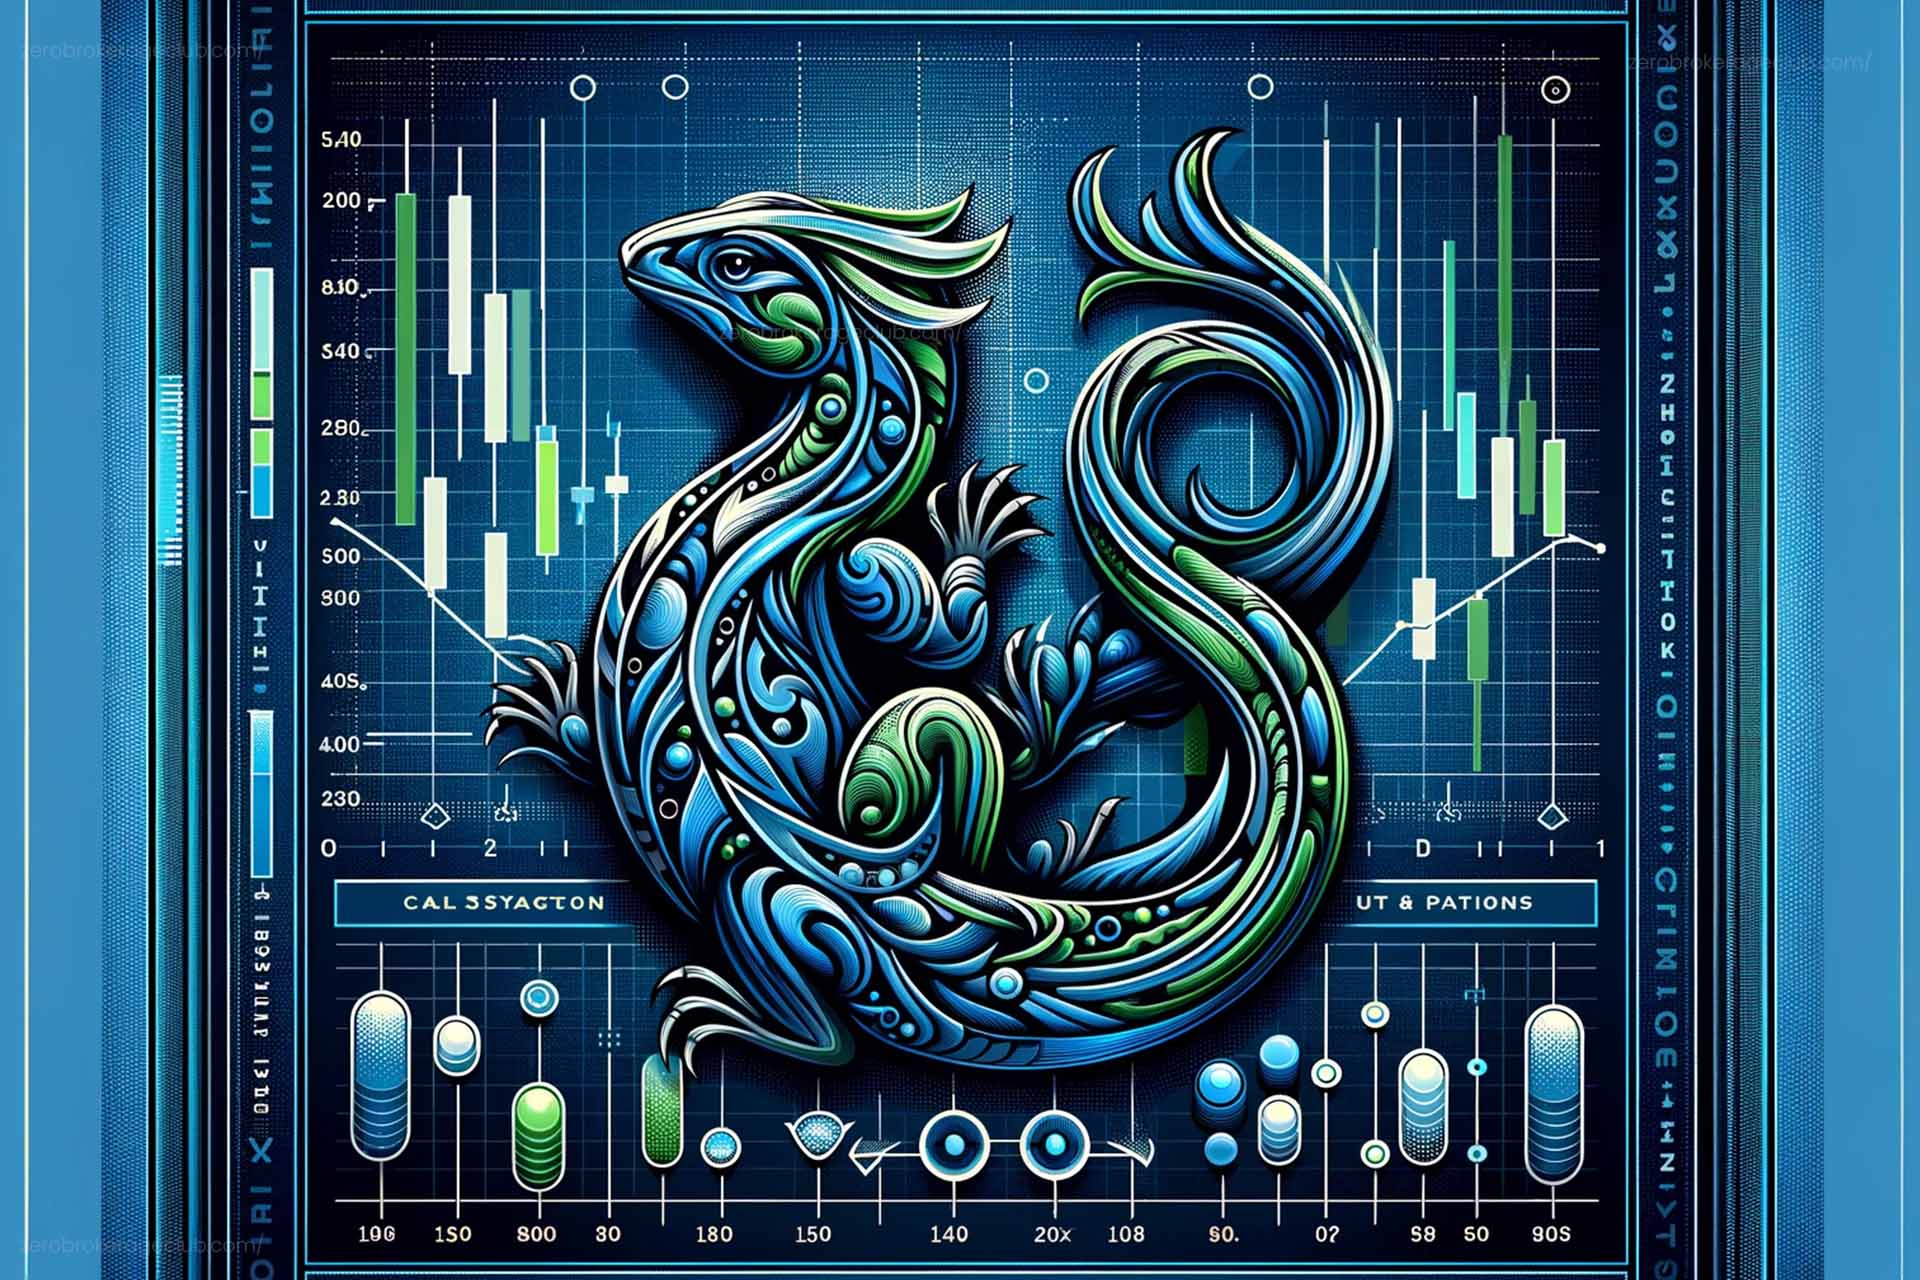 Jade Lizard Option Strategy - A Holy Grail for Option Traders?